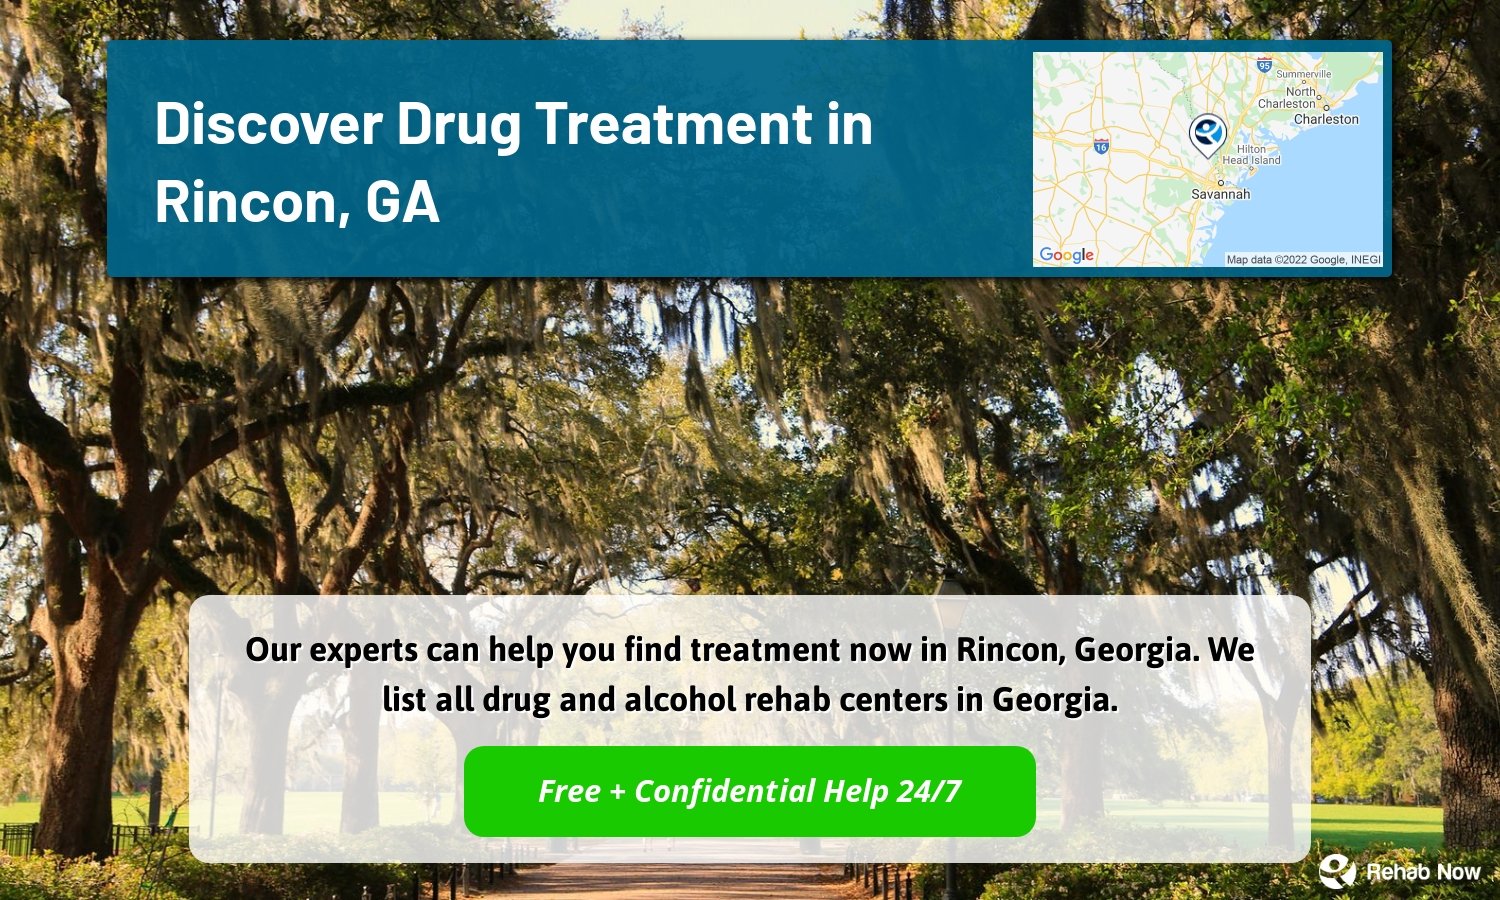 Our experts can help you find treatment now in Rincon, Georgia. We list all drug and alcohol rehab centers in Georgia.